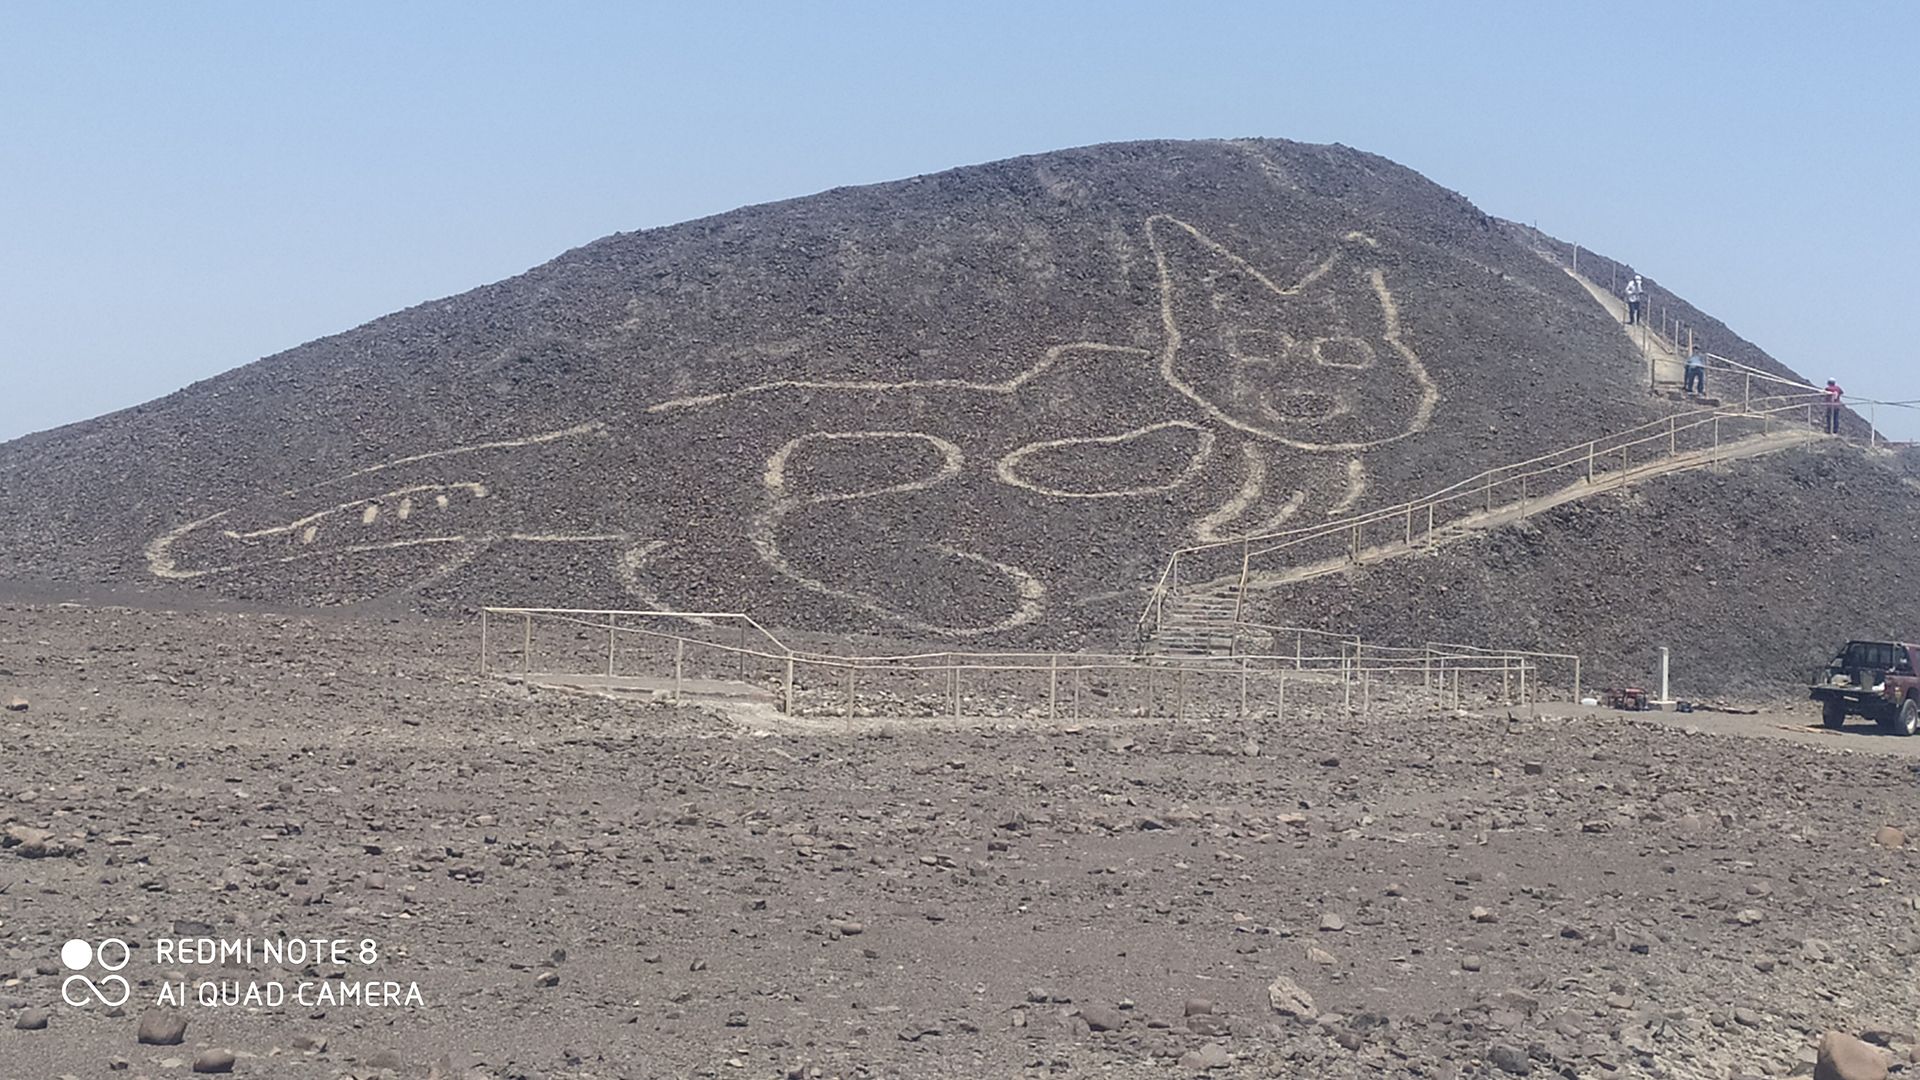 <p>                     A 120-foot-long geoglyph of a cat discovered in Peru in 2020 is the most recent example of a Nazca Line to be found. The geoglyph was heavily eroded and barely visible, but conservation work revealed a more complete picture of the cat, which looks a bit like a child's doodle. Archaeologists estimate that the geoglyph was constructed sometime between 200 B.C. and 100 B.C., a time when many Nazca Lines were being built.                   </p>